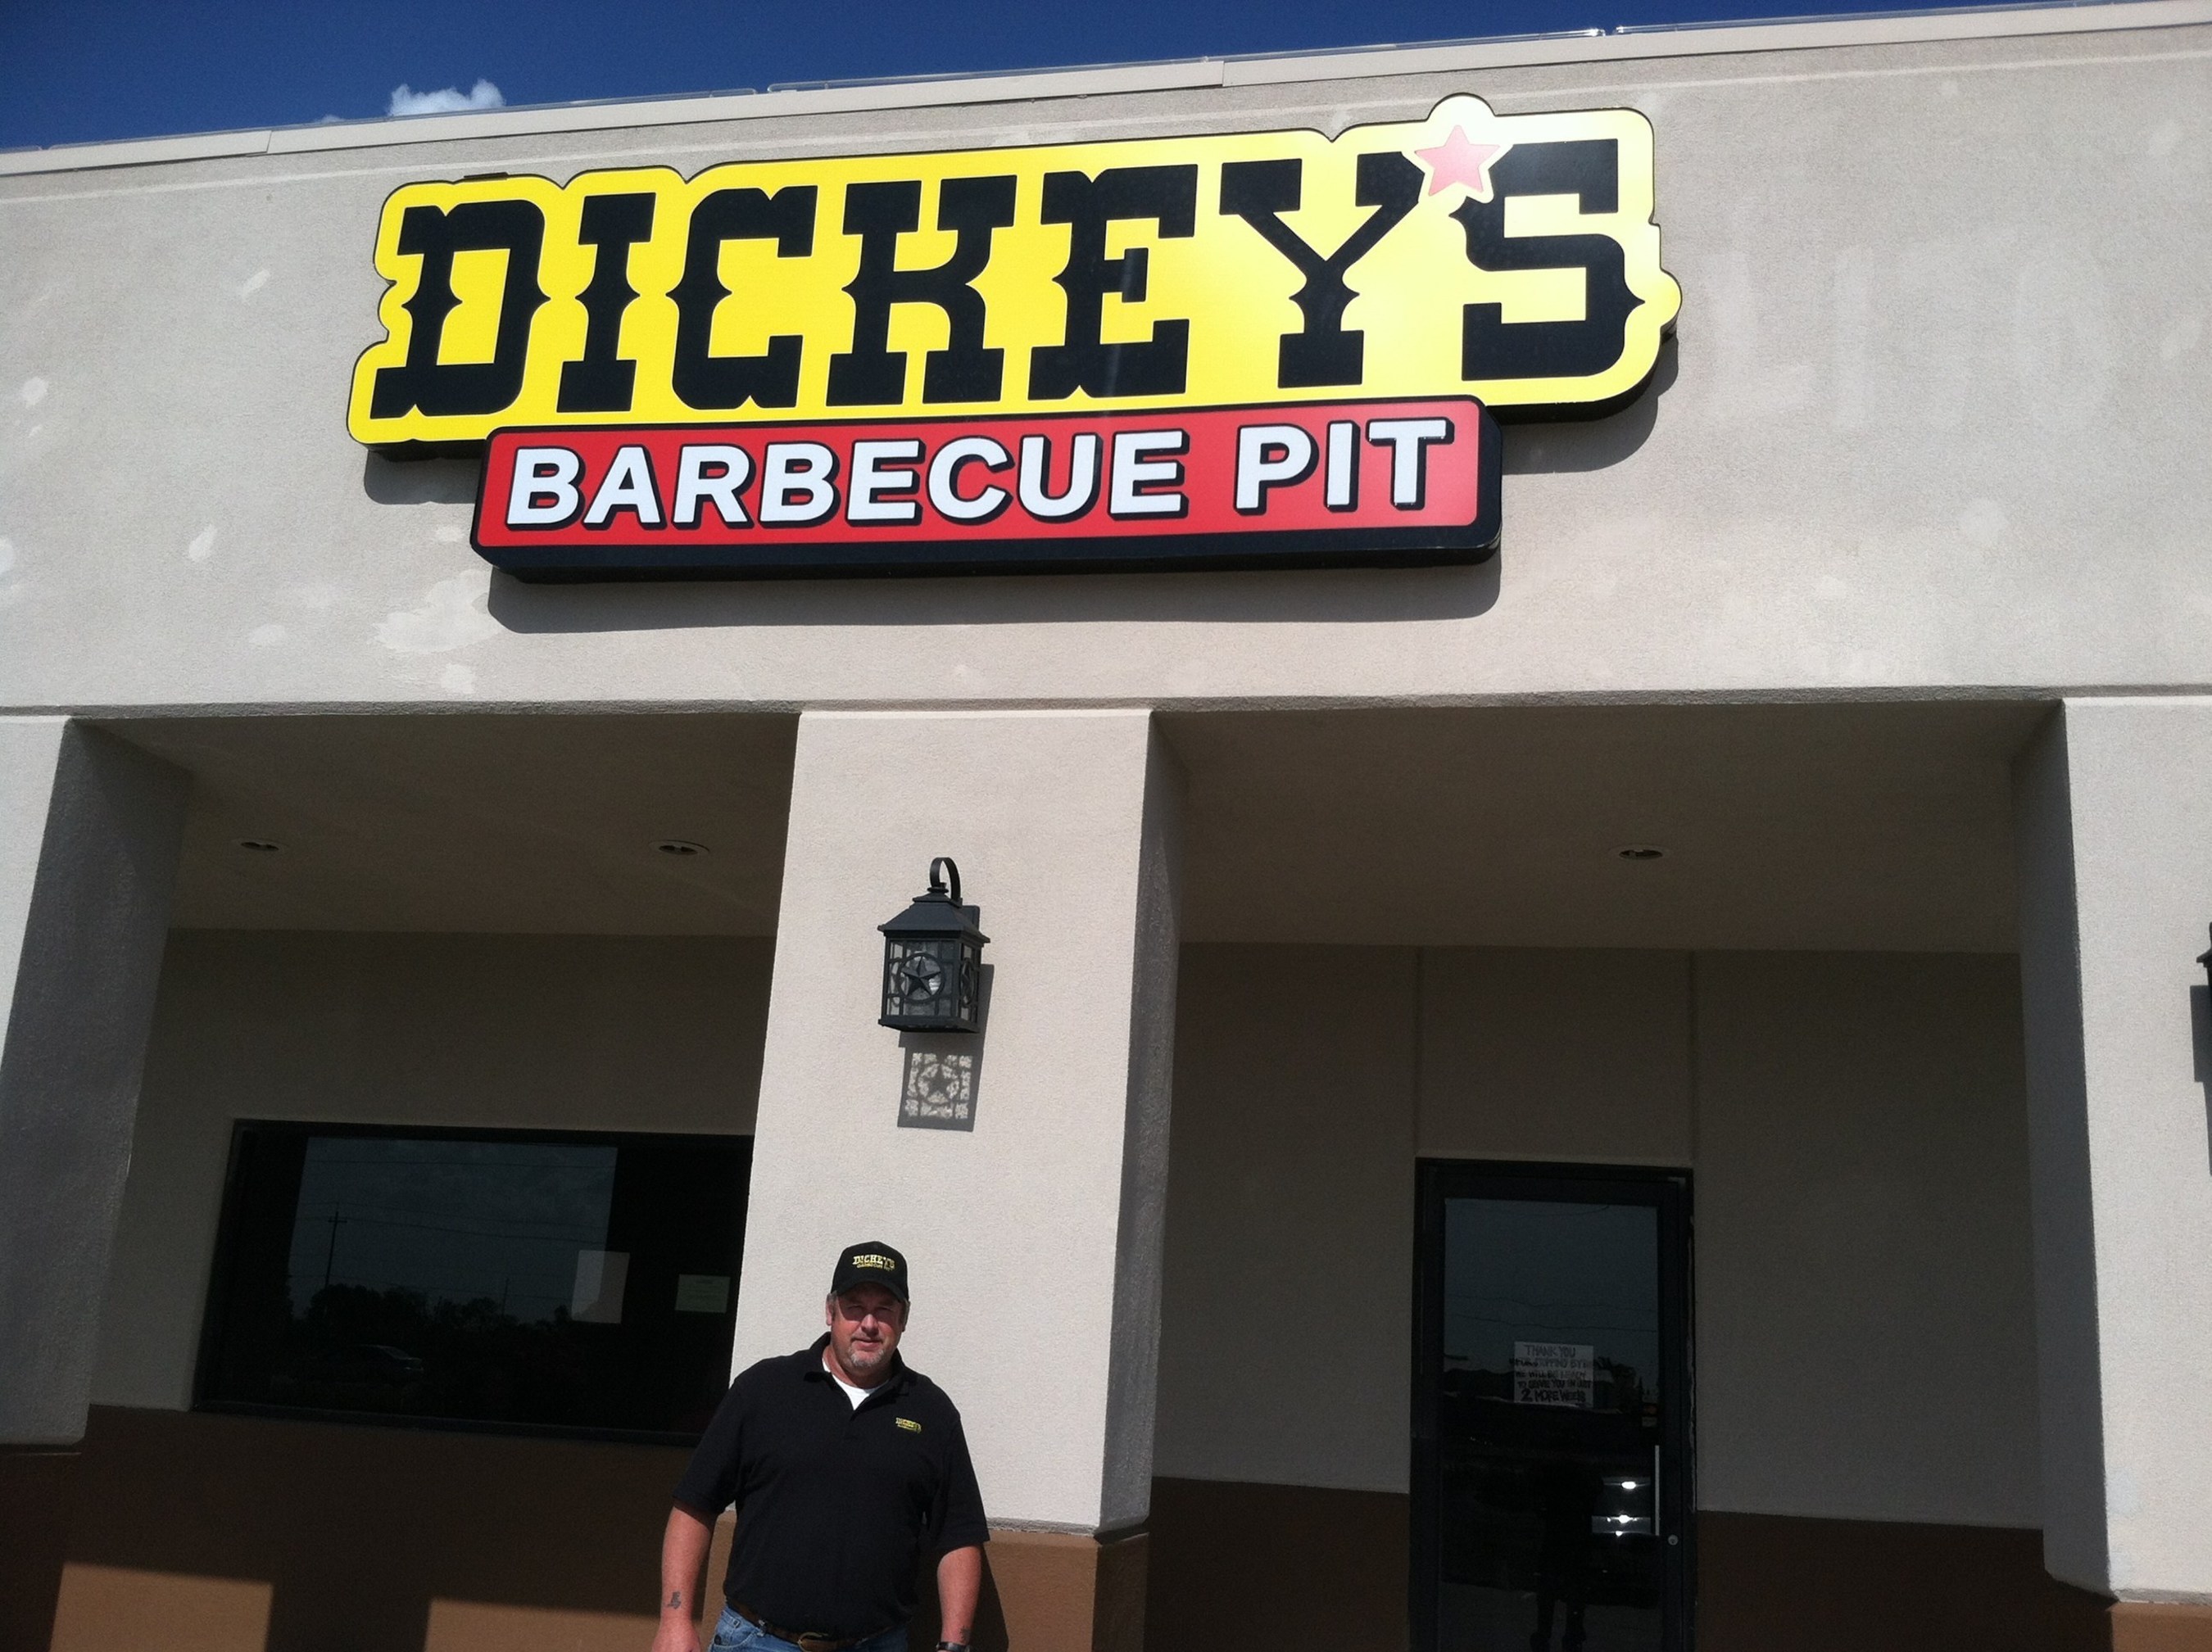 Marine Veteran Tracy Norris outside his new Dickey's Barbecue Pit in Sanger. The location opens Thursday with gift card giveaways. (PRNewsFoto/Dickey's Barbecue)